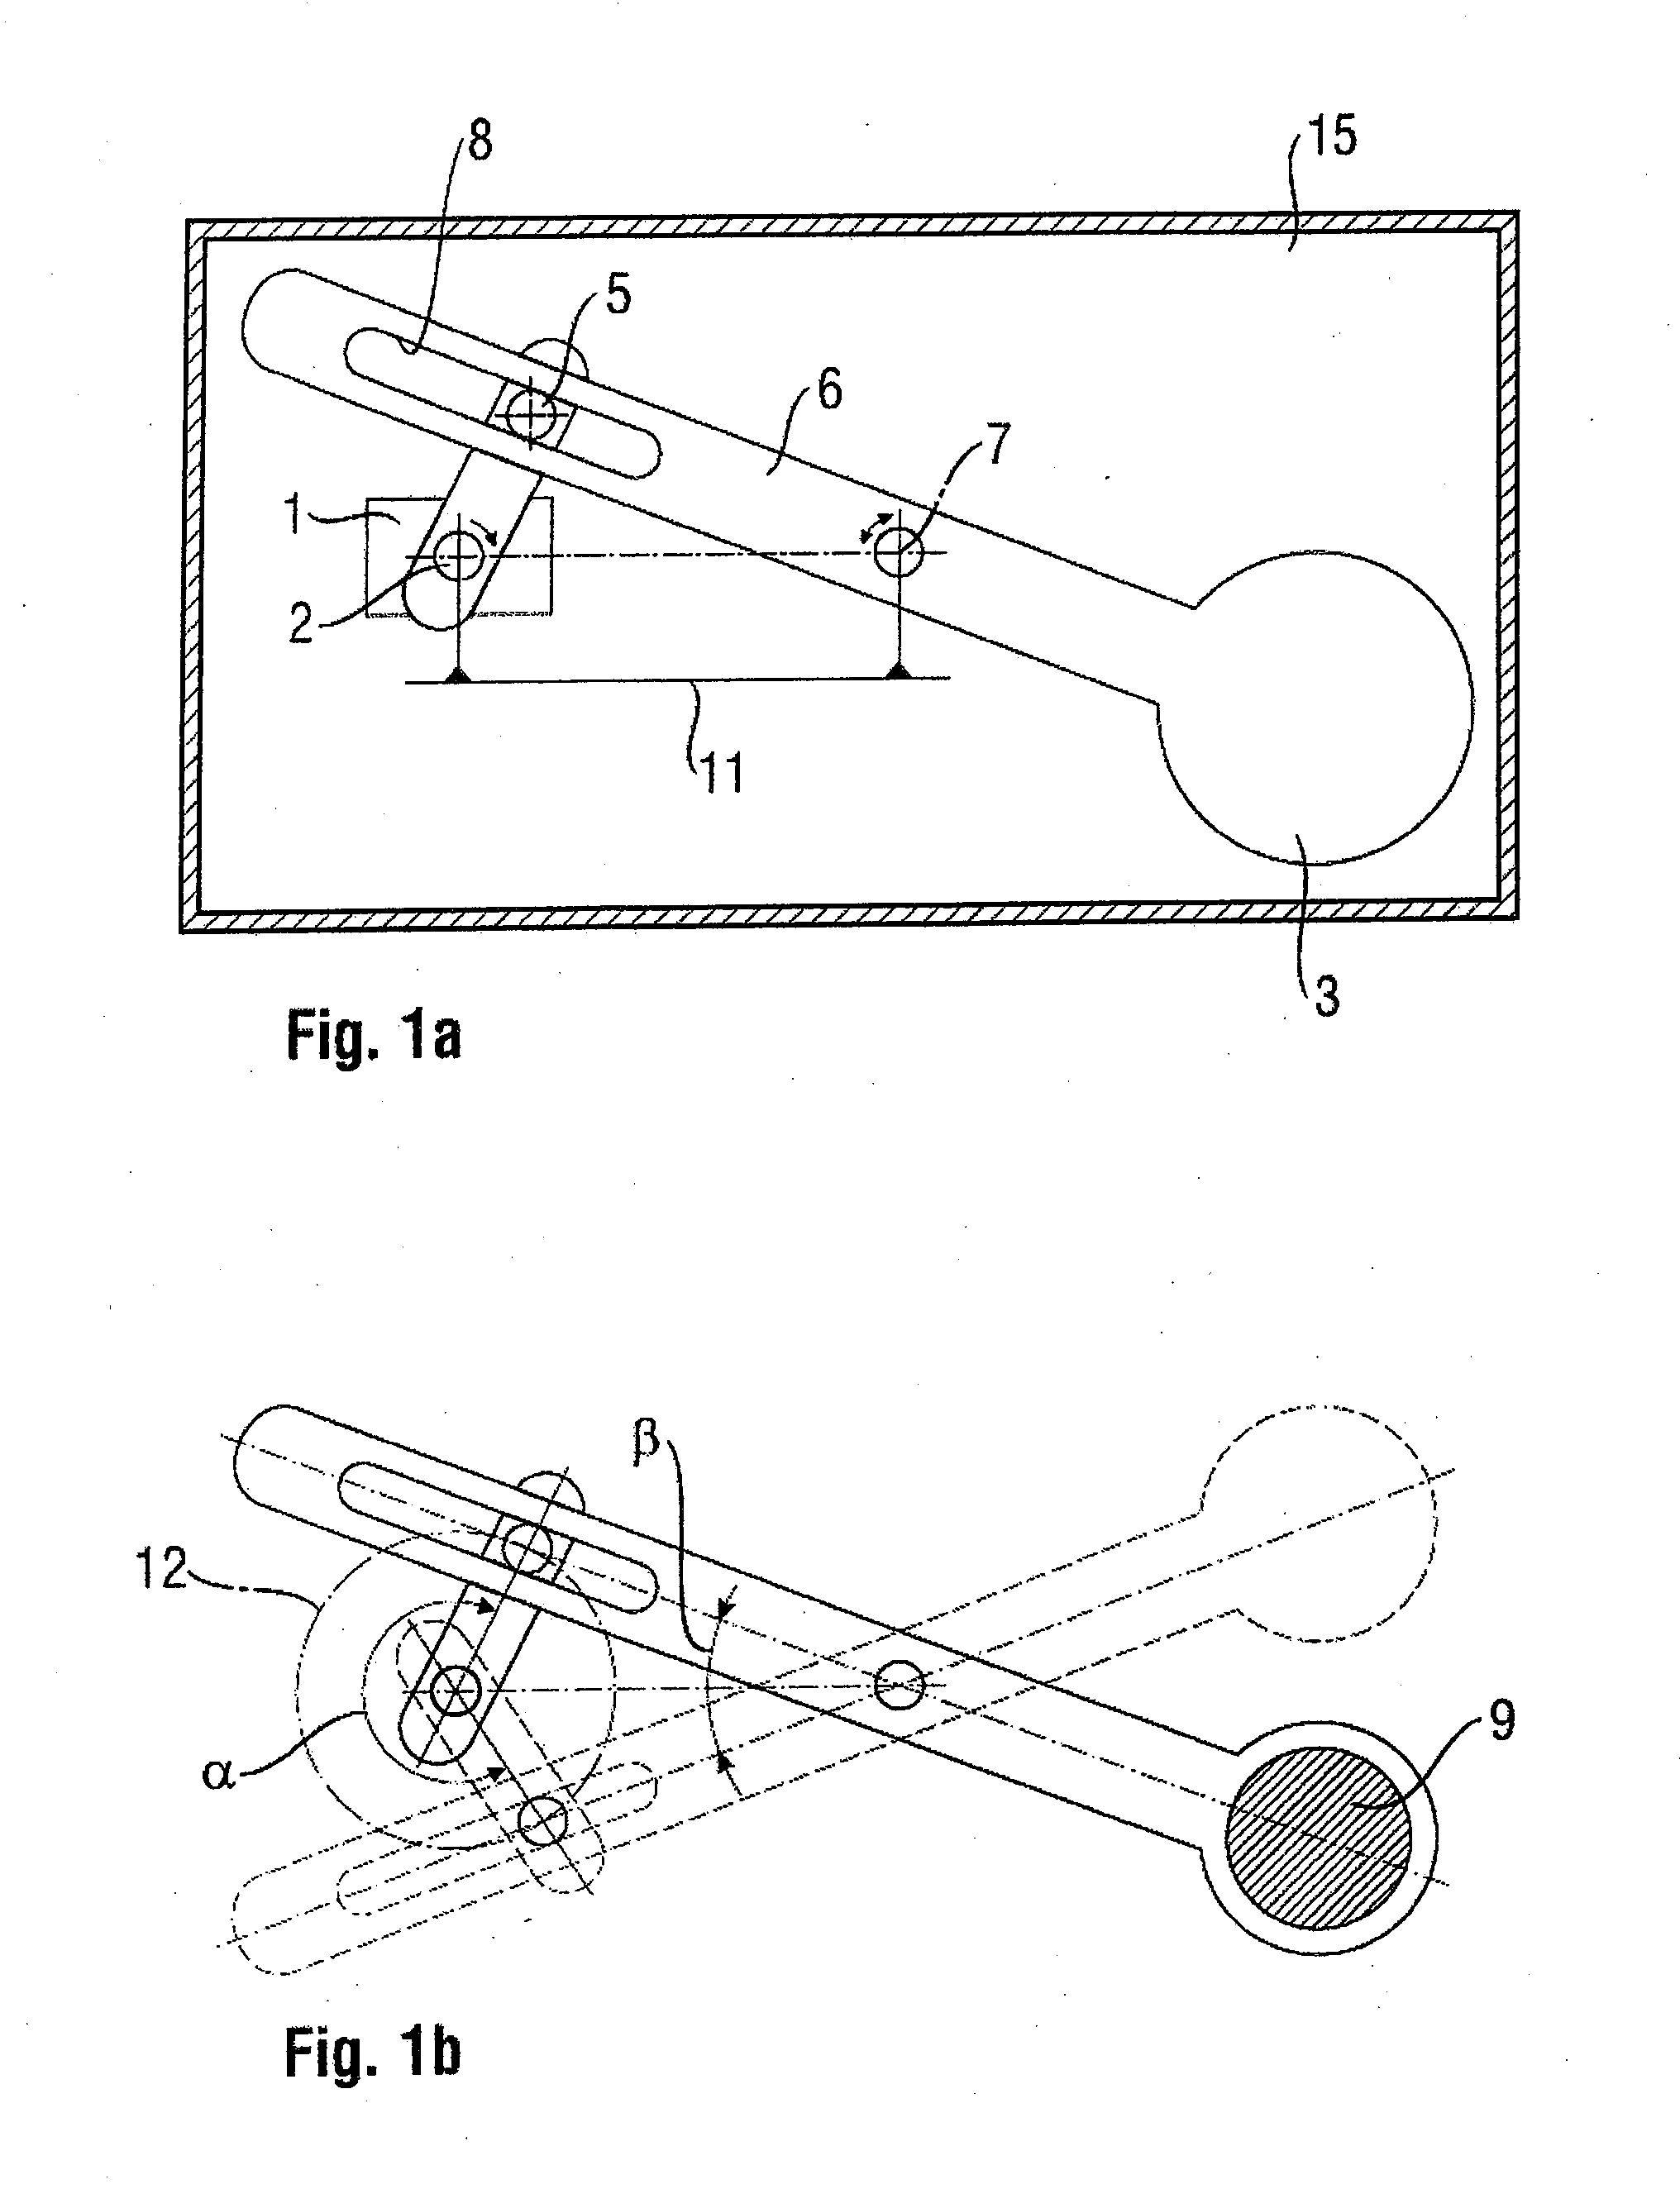 Thermal imaging camera with a fast electromechanical shutter device